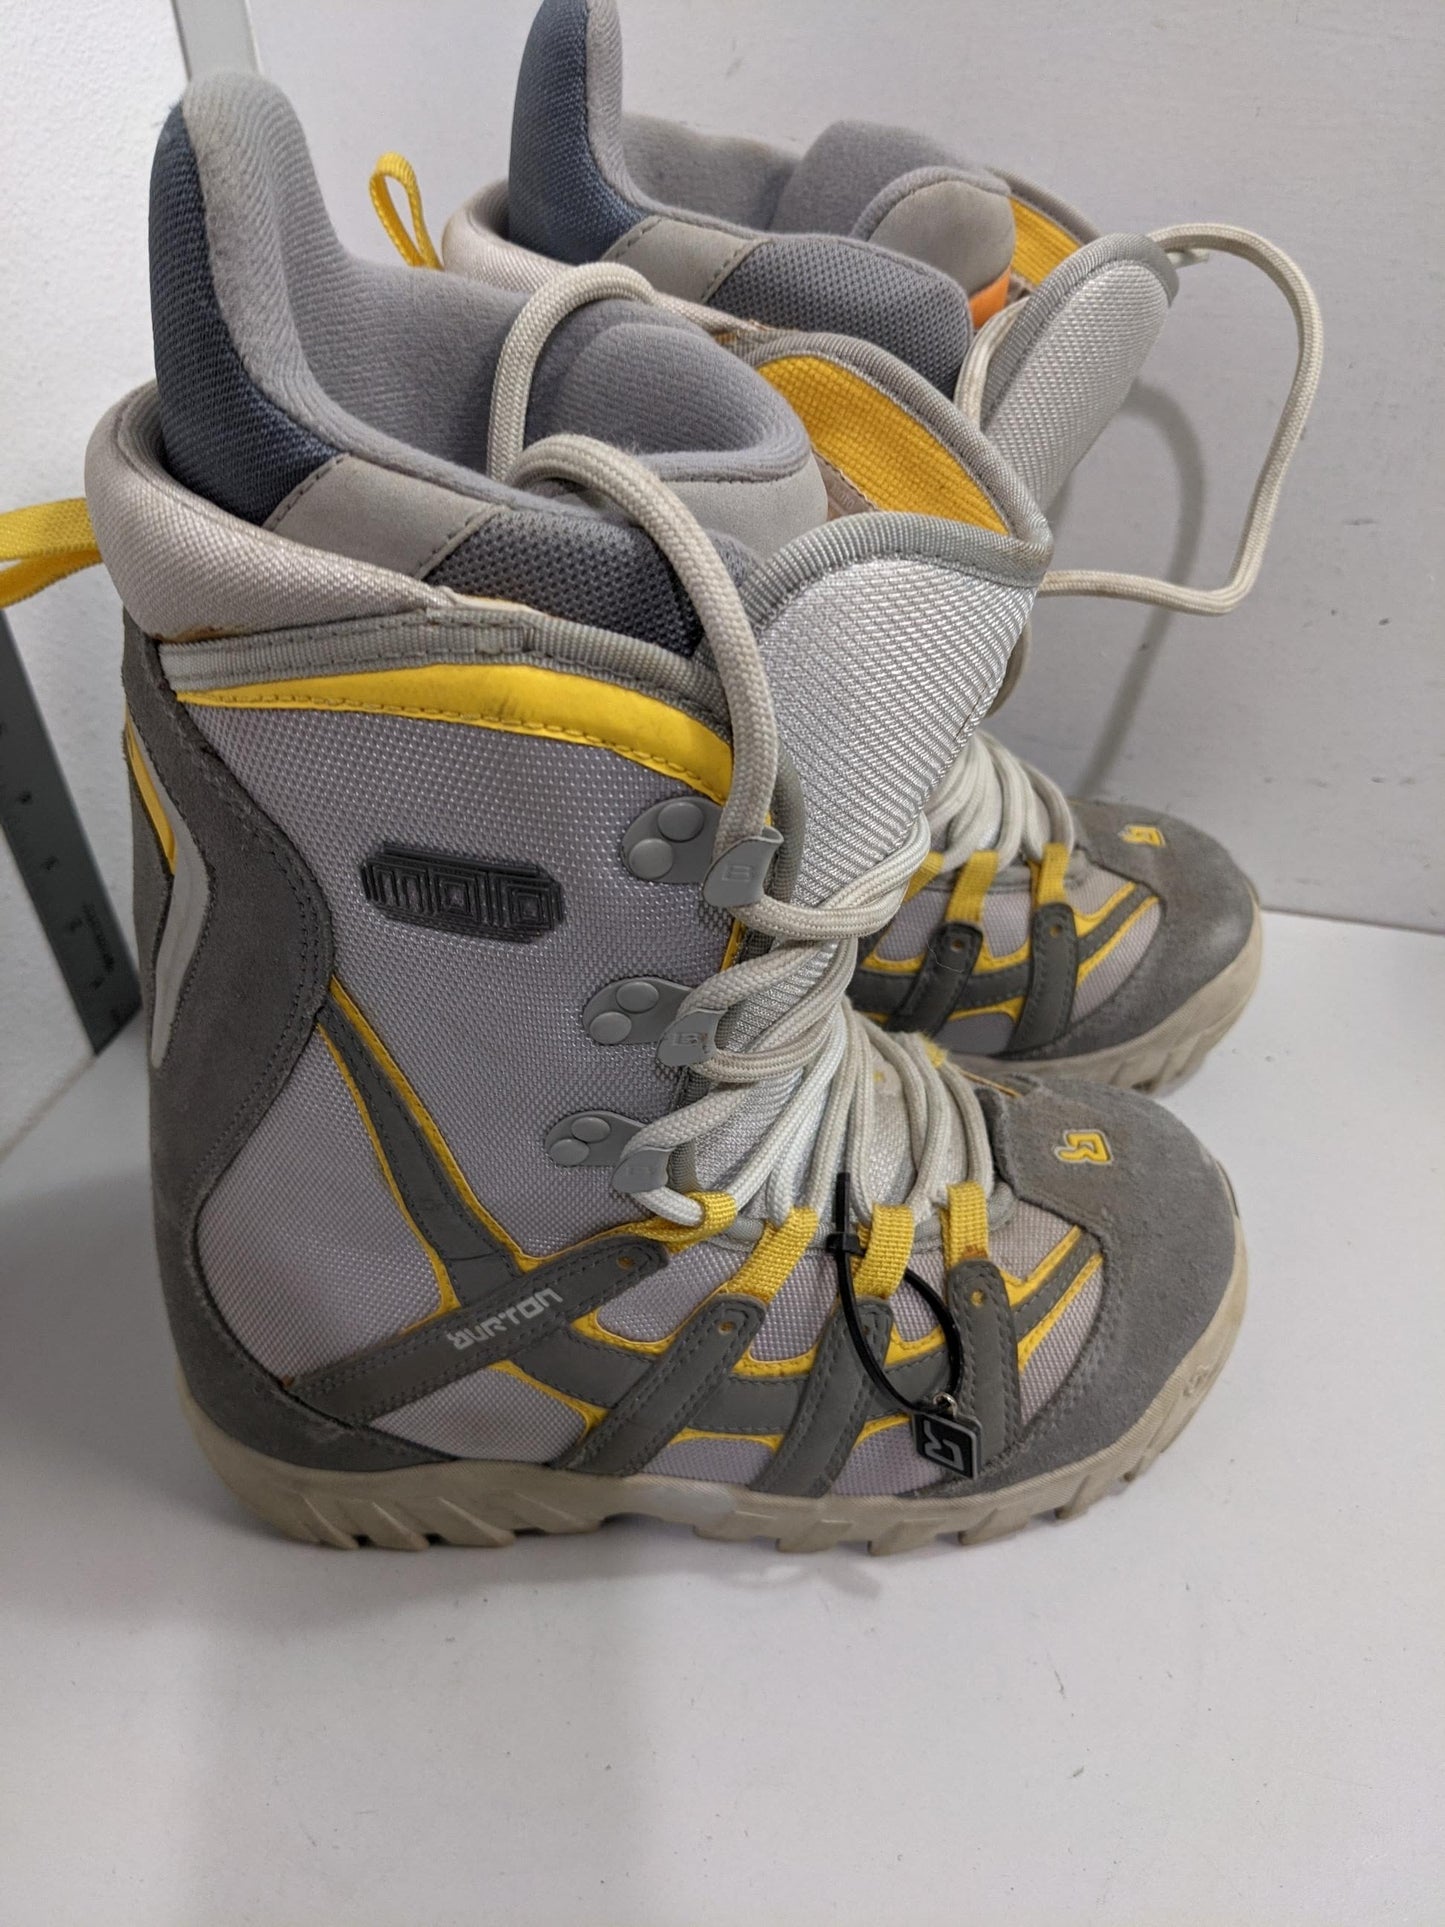 Burton Lace-Up Snowboard Boots Size 6 Gray Used